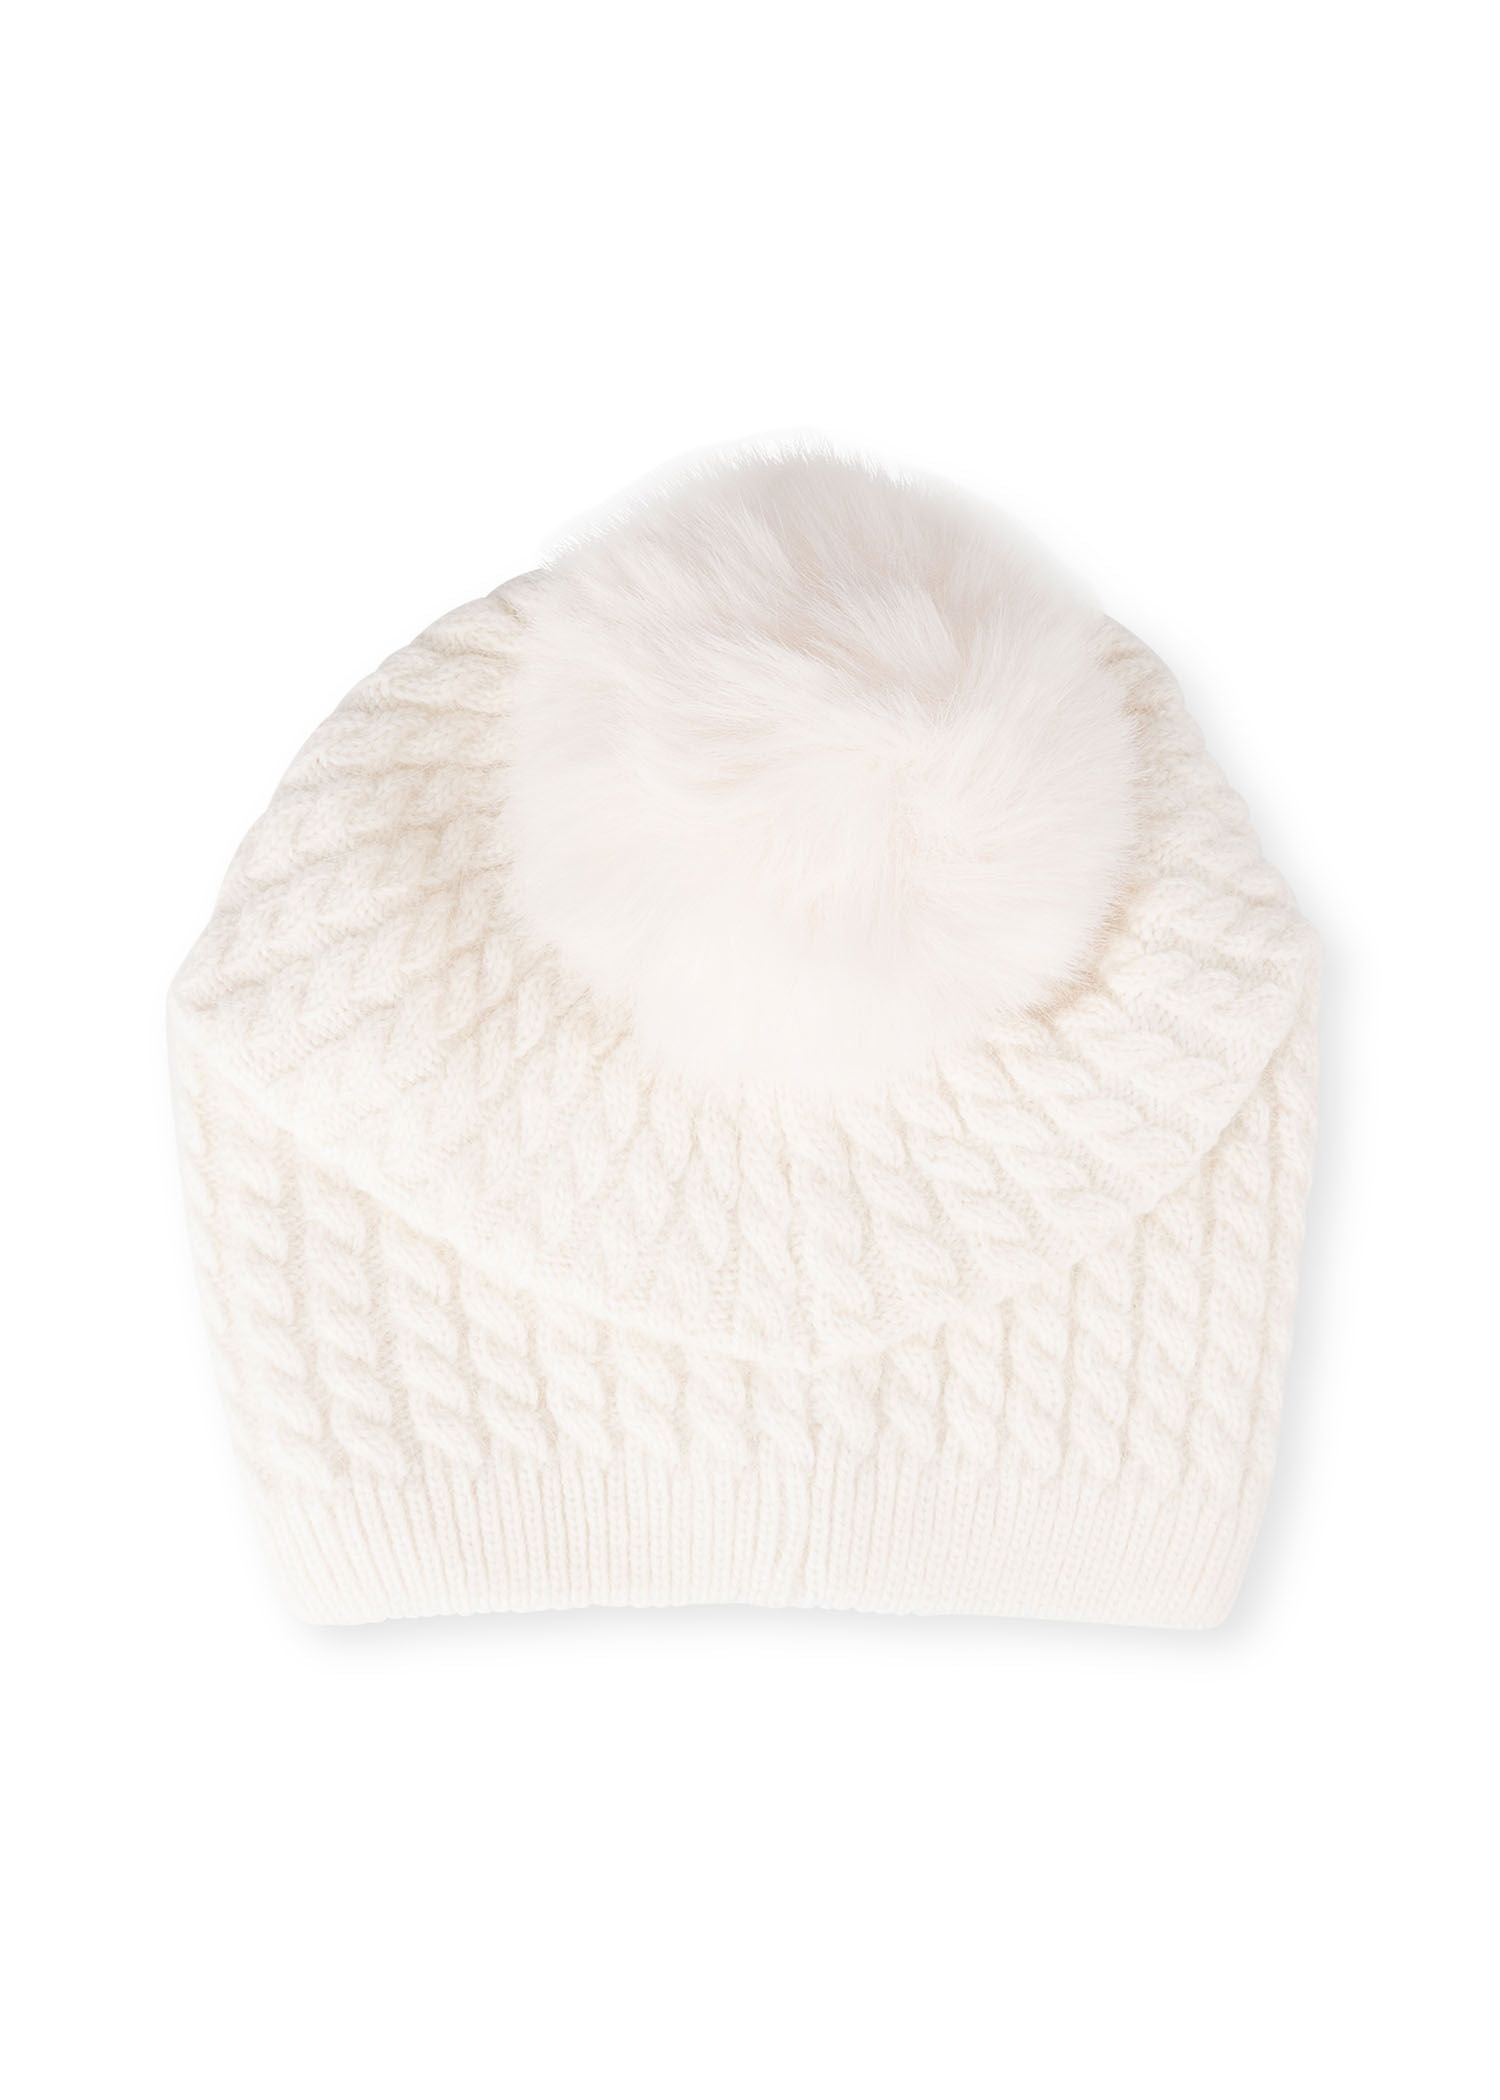 cabin cable hat white